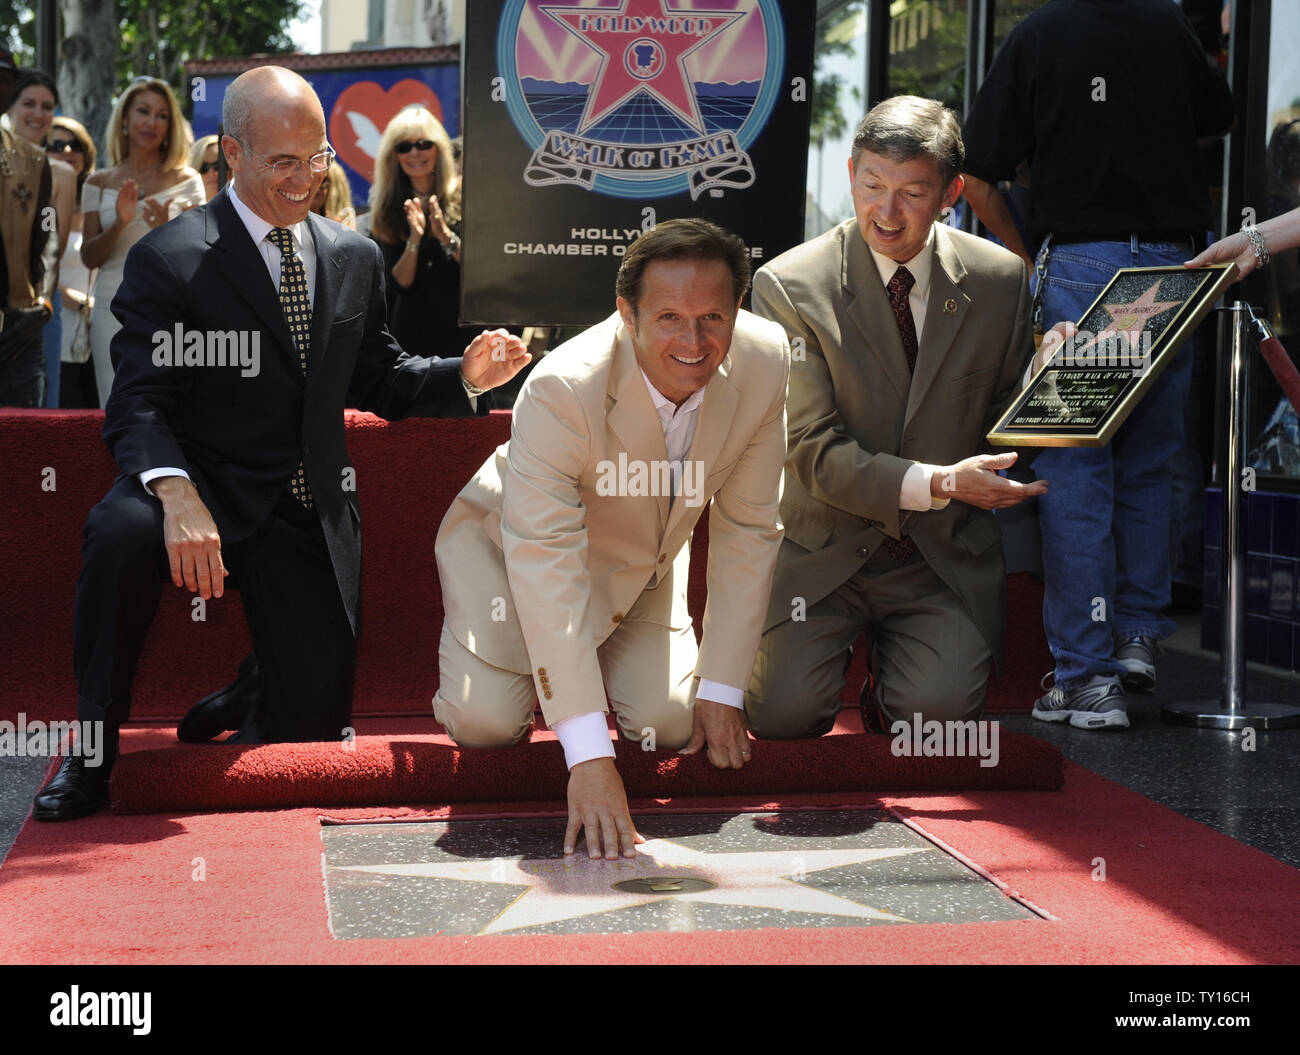 Director of Dreamworks Animation SKG, Jeffrey Katzenberg (L-R), Producer Mark Burnett, and Hollywood Chamber of Commerce President and CEO Leron Gubler participate in a ceremony where Burnett receives a star on the Hollywood Walk of Fame in Los Angeles on July 8, 2009. Burnett has produced reality television series like 'Survivor,' 'The Apprentice,' 'The Contender,' and 'Are You Smarter Than a Fifth Grader.'(UPI Photo/ Phil McCarten) Stock Photo